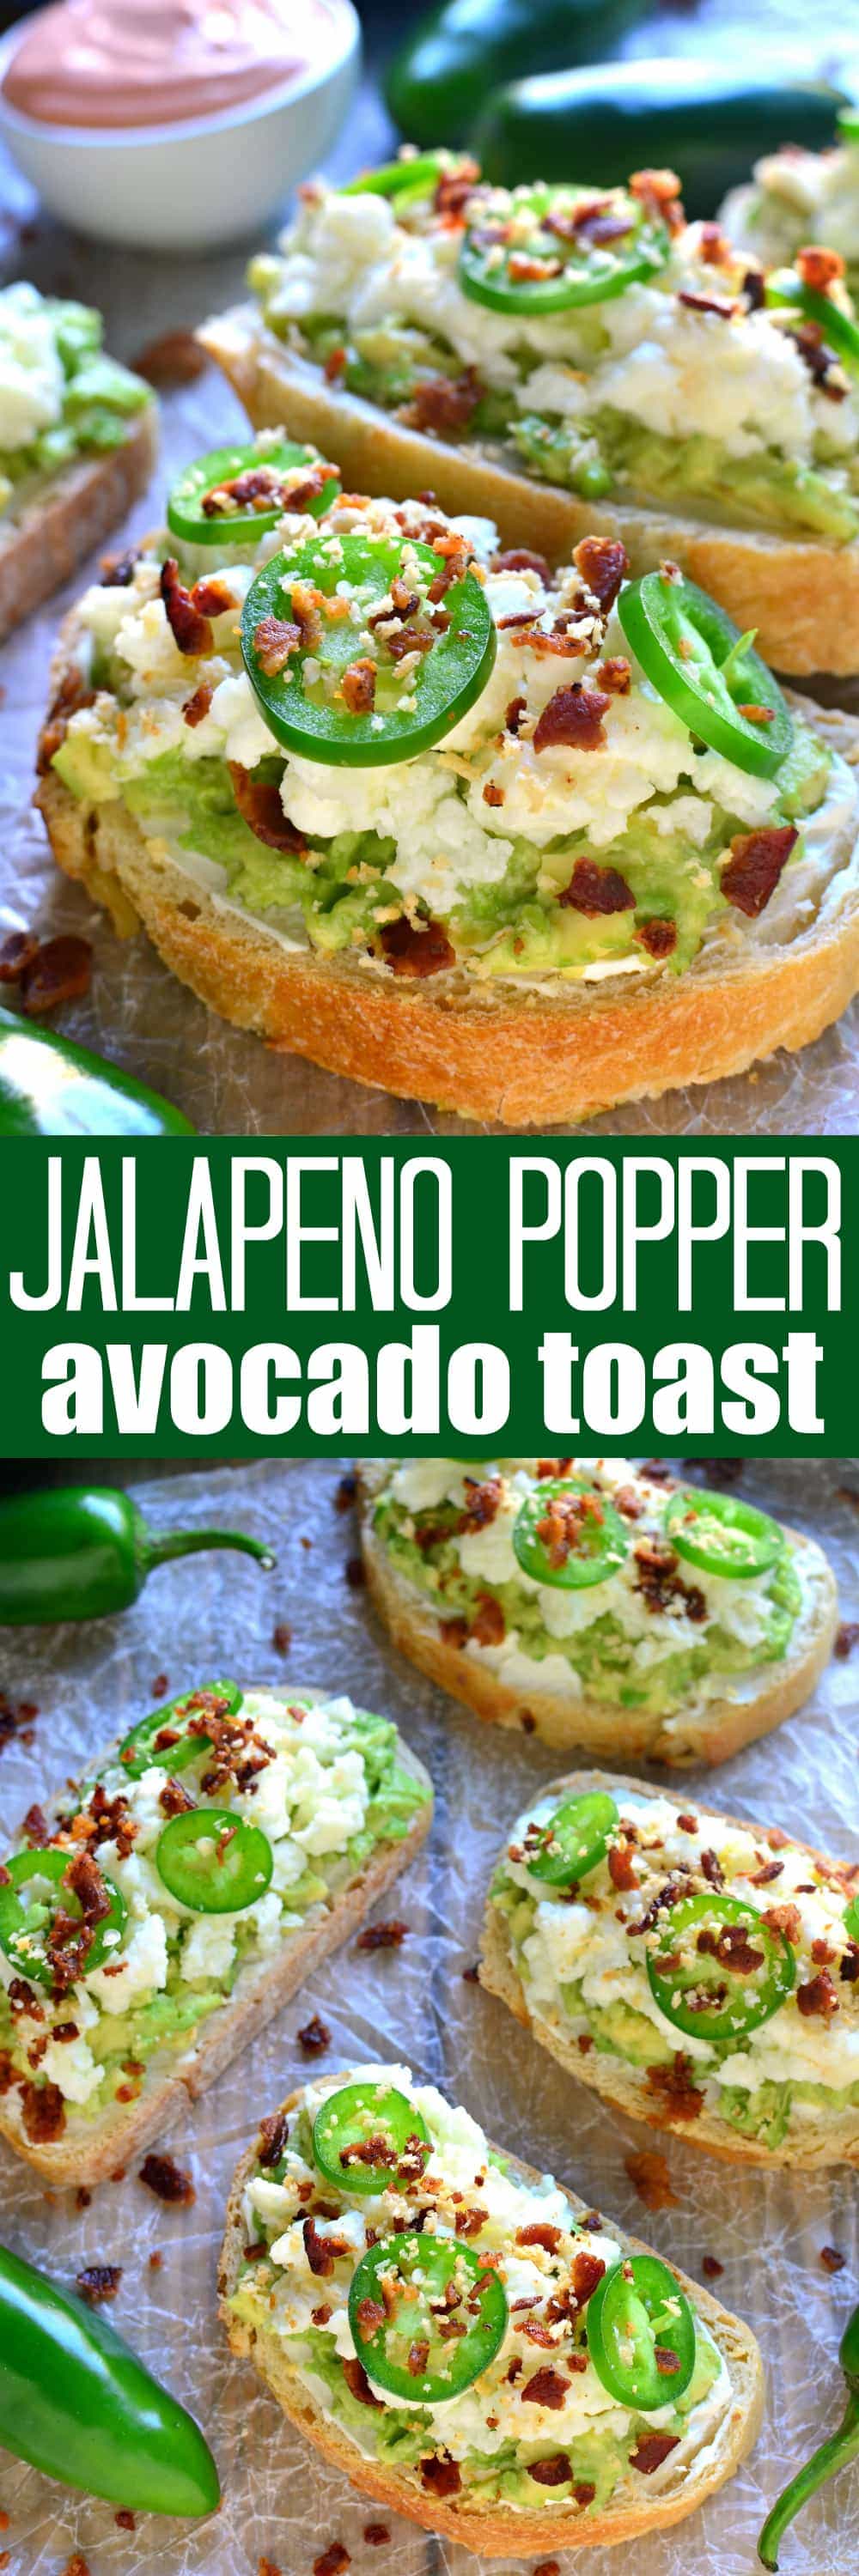 Jalapeño Popper Avocado Toast combines two classics in one delicious dish that's perfect for breakfast, lunch, or an anytime snack!